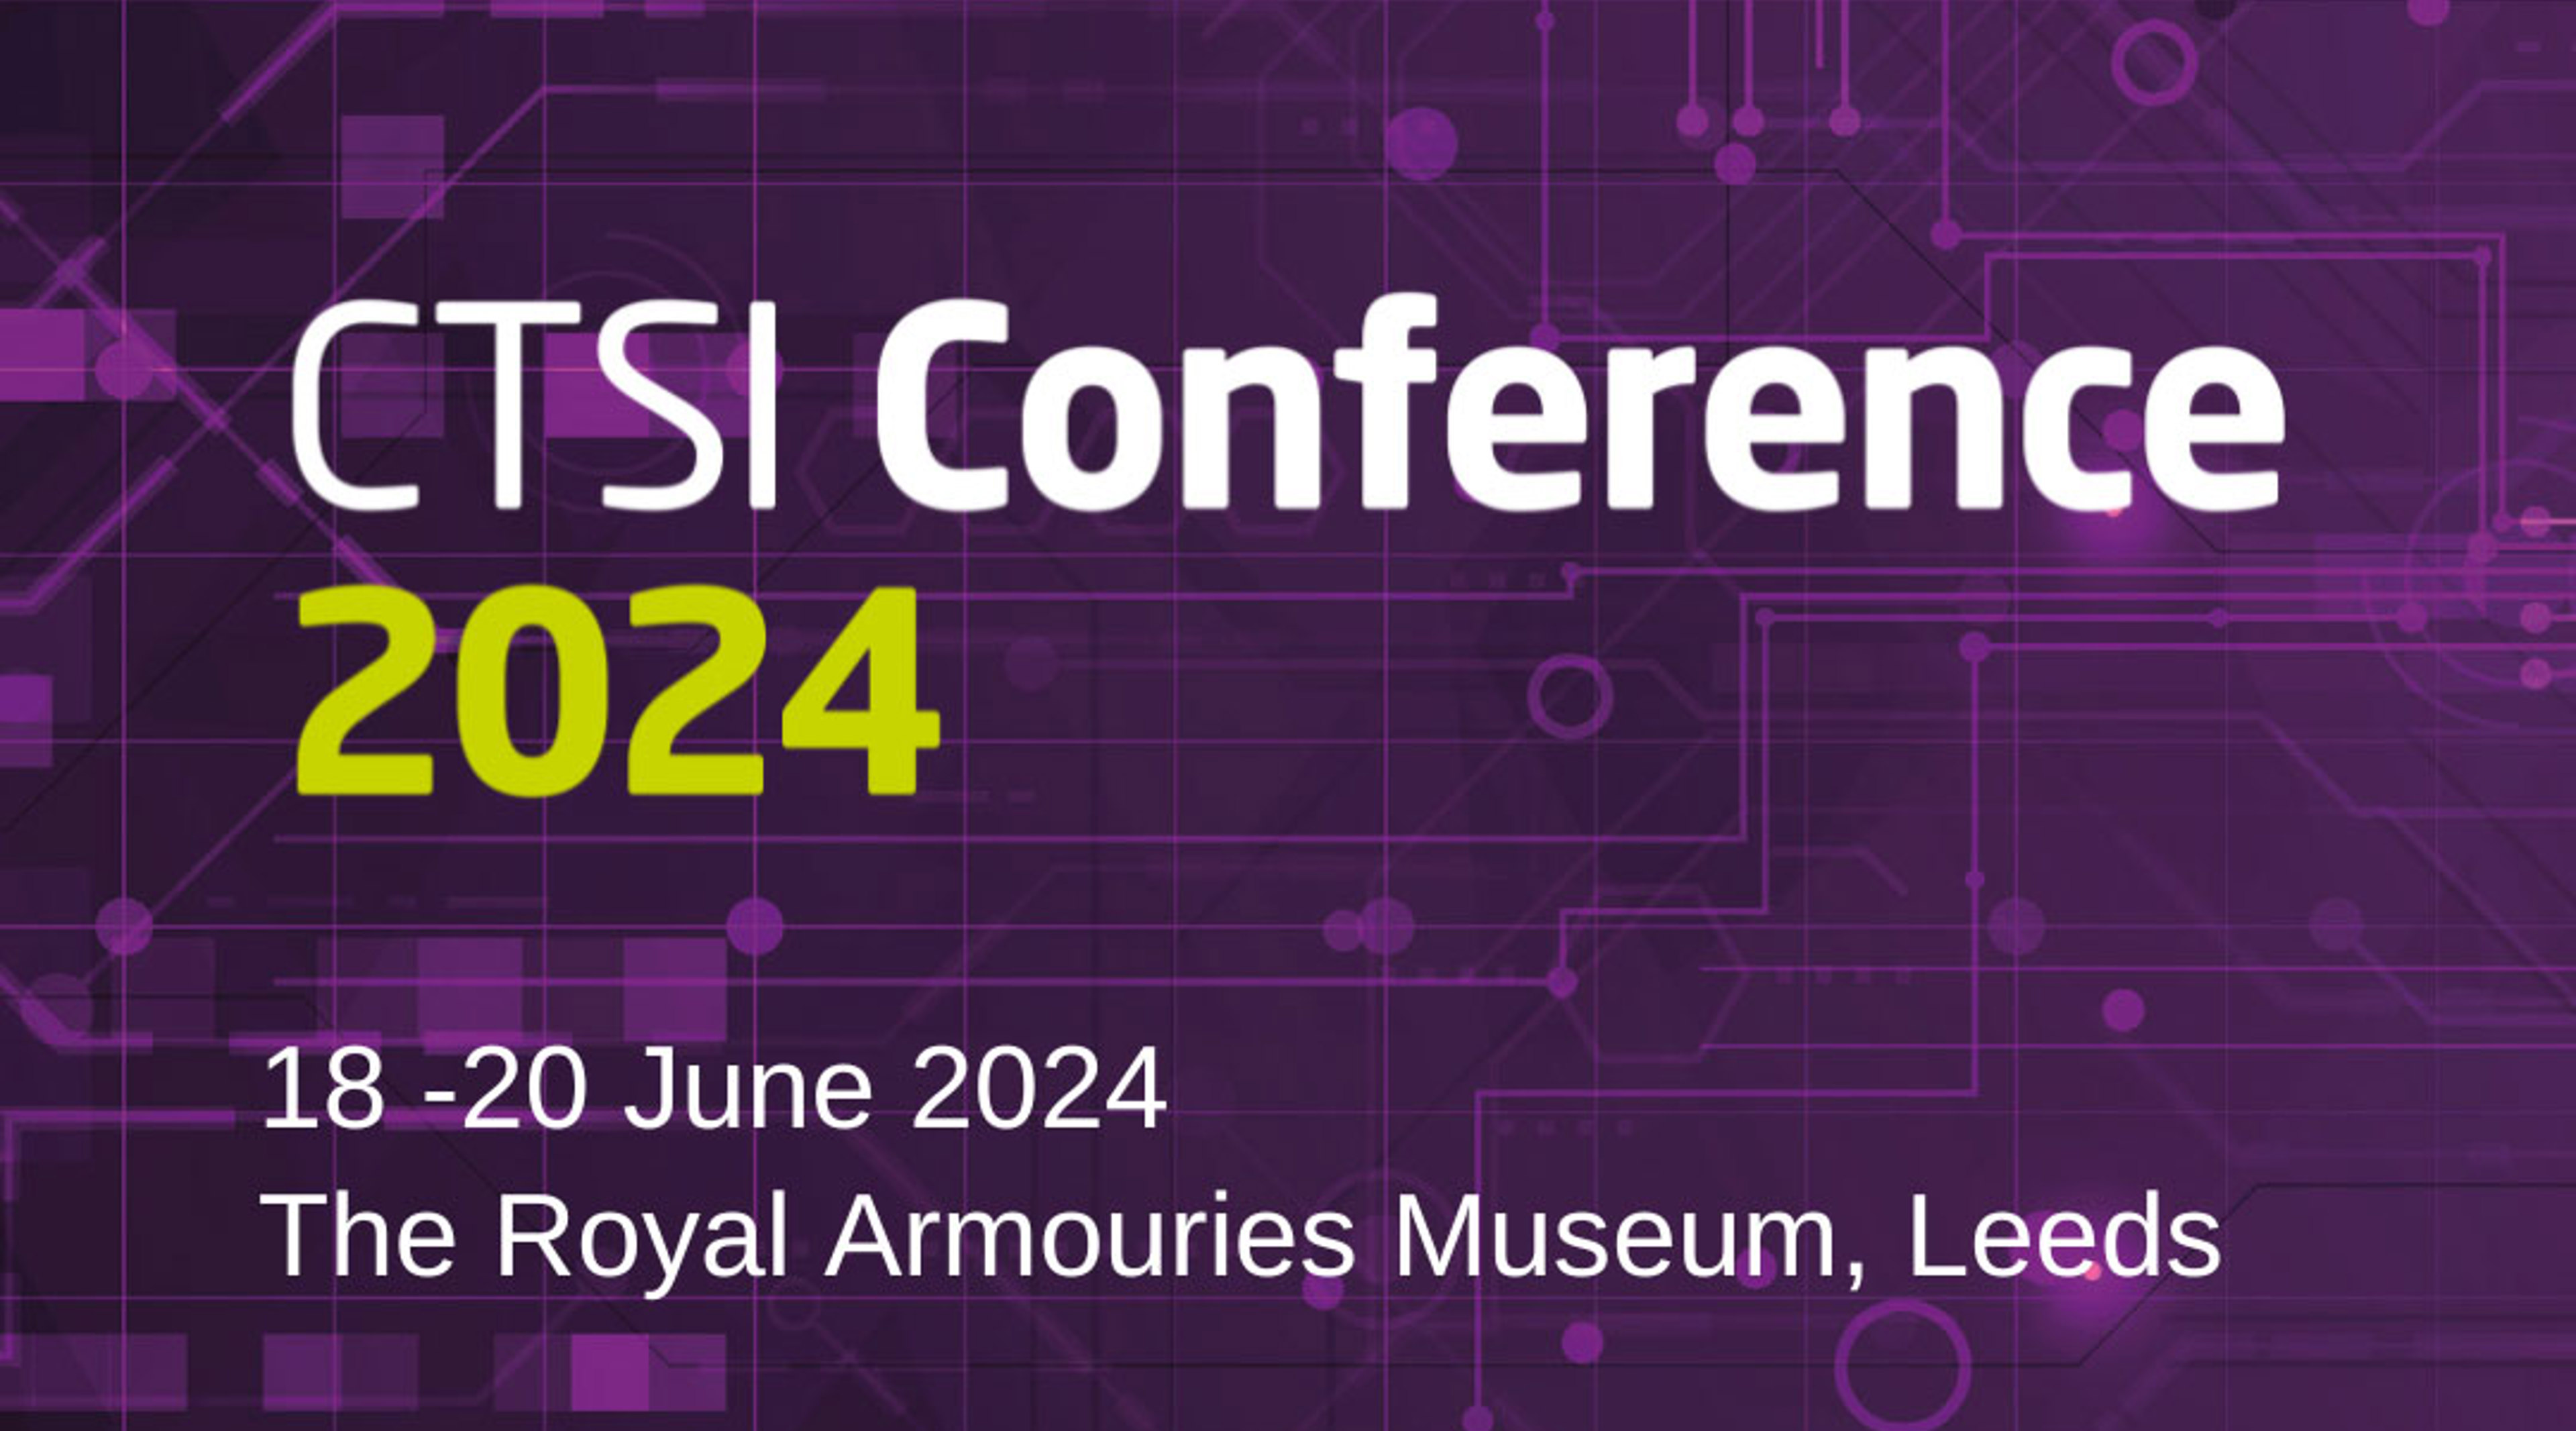 CTSI Conference 2024. 18-20 June 2024. The Royal Armouries Museum, Leeds